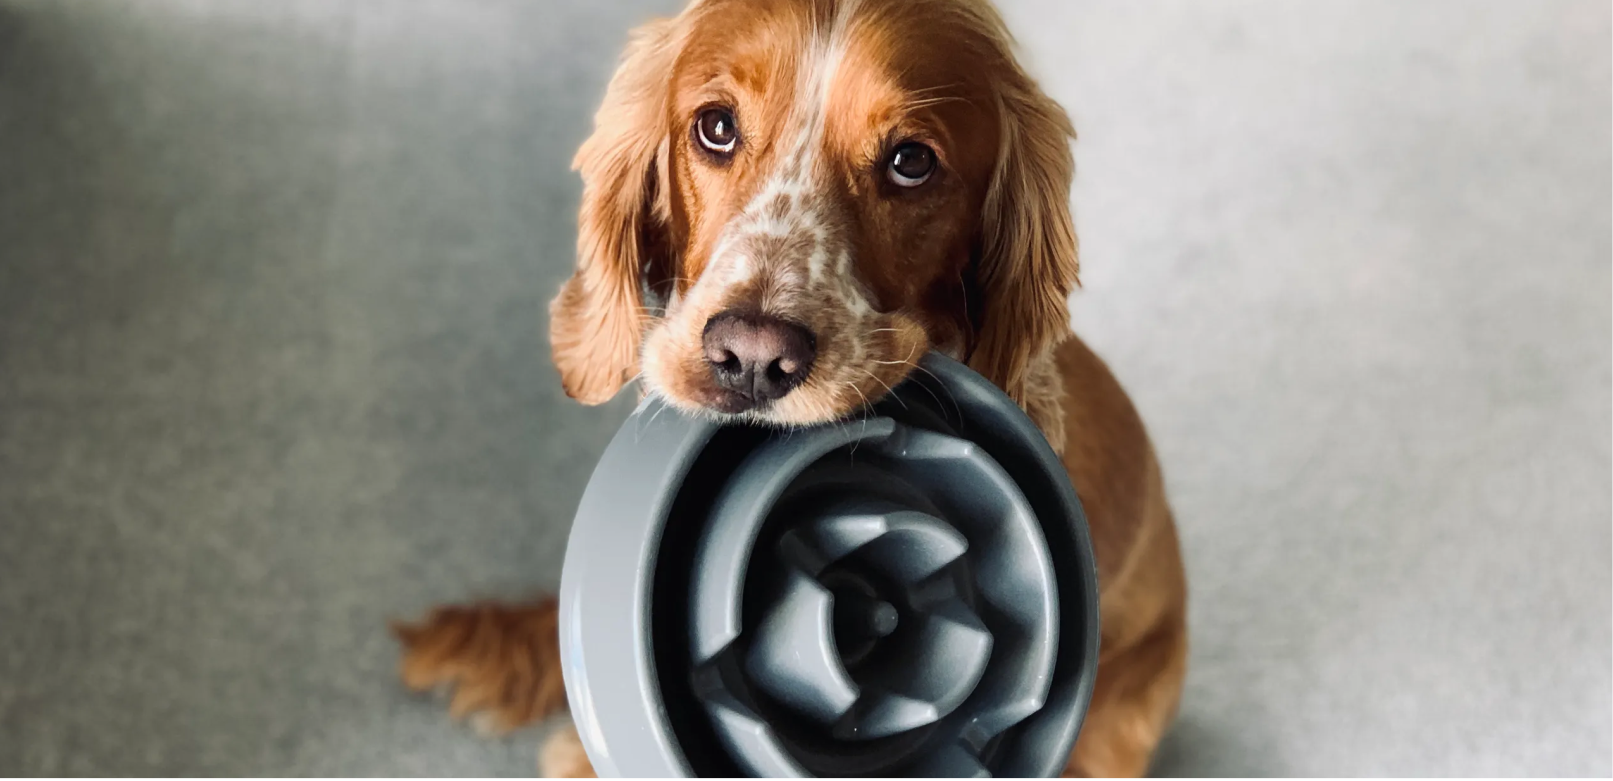 The Best Diet for Your Puppy: from Kibble to Homemade Meals